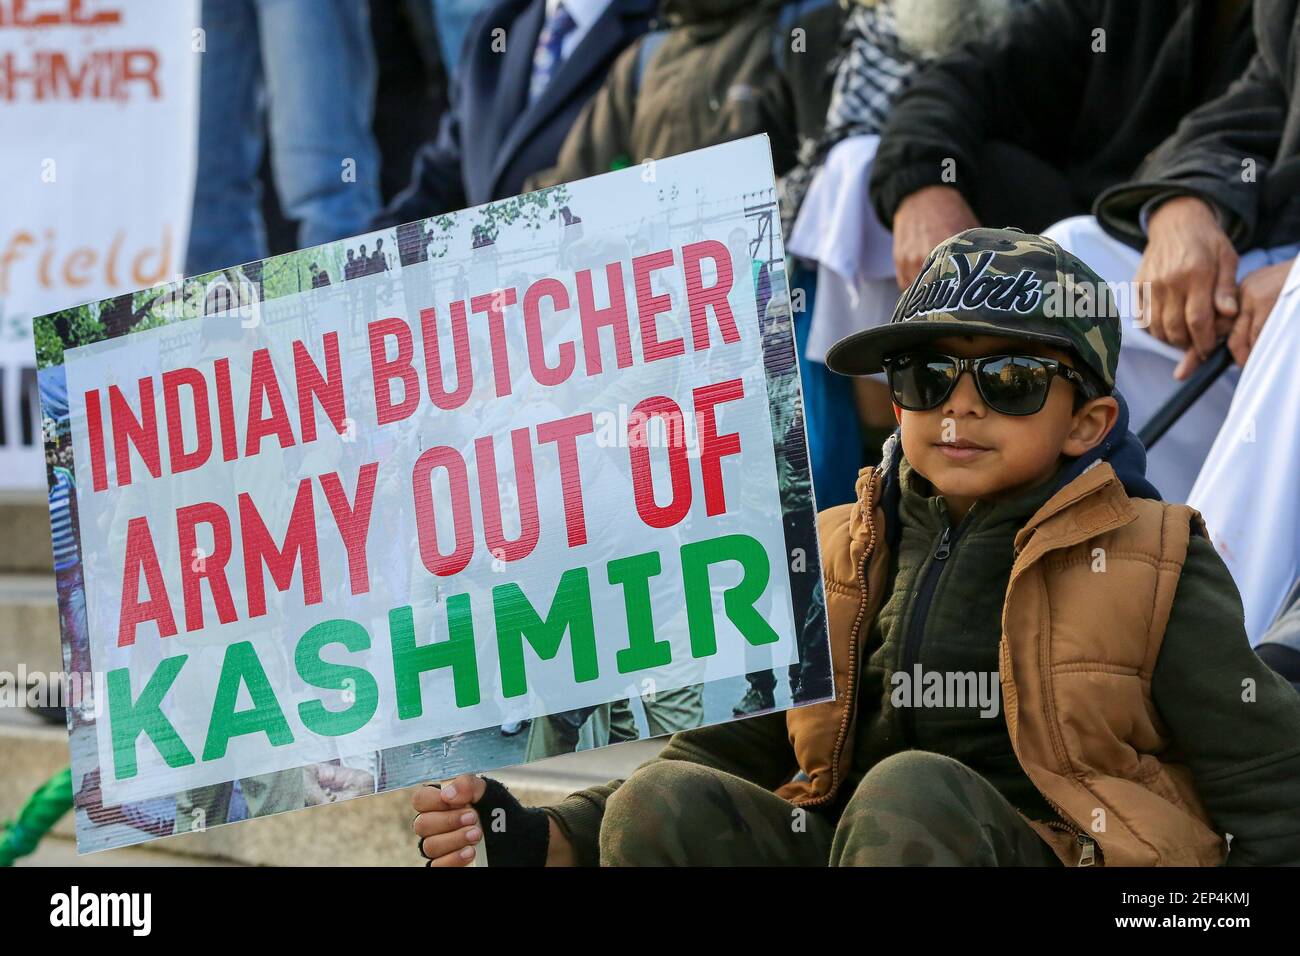 a-young-kashmir-supporter-with-a-placard-during-the-rally-in-trafalgar-square-on-diwali-day-th...jpg